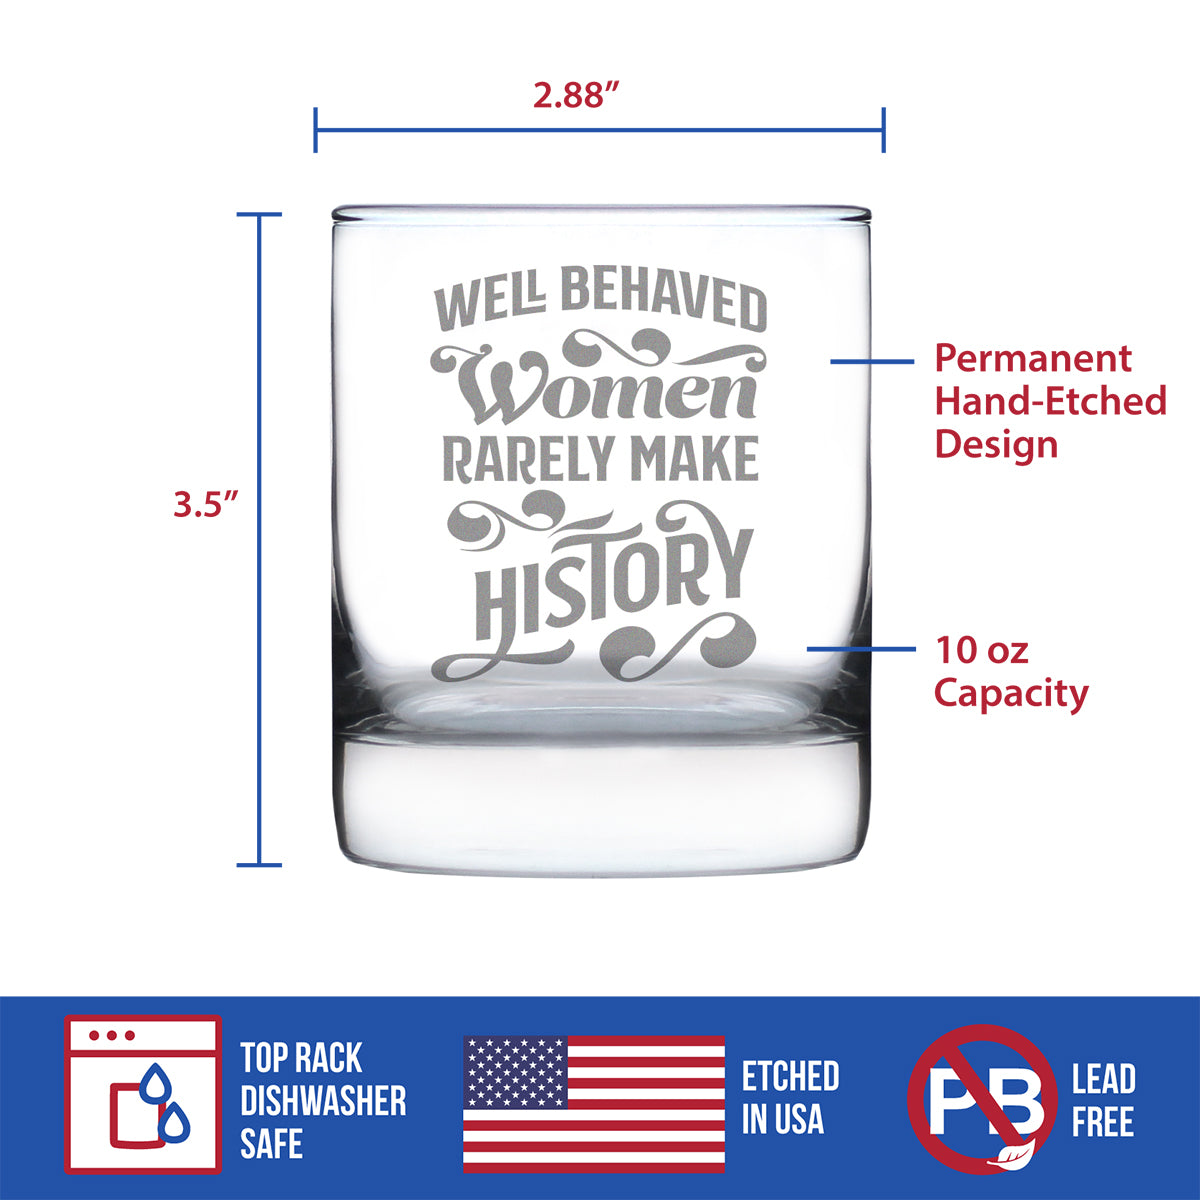 Well Behaved Women Rarely Make History - Whiskey Rocks Glass - Funny Themed Gifts or Party Décor for Women - 10.25 Oz